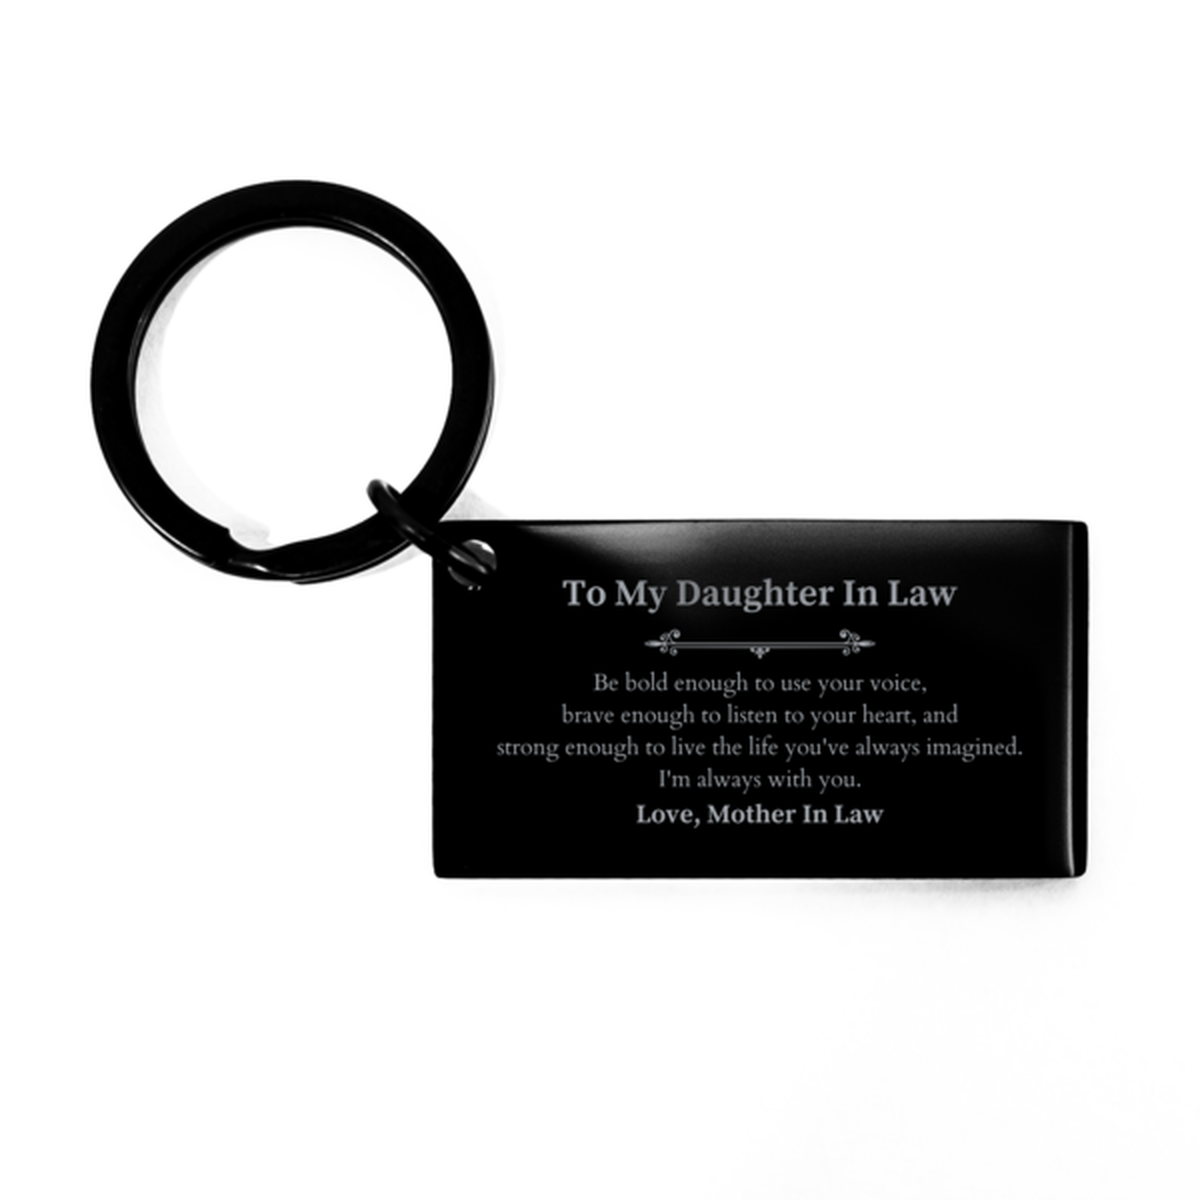 Keepsake Daughter In Law Keychain Gift Idea Graduation Christmas Birthday Daughter In Law from Mother In Law, Daughter In Law Be bold enough to use your voice, brave enough to listen to your heart. Love, Mother In Law